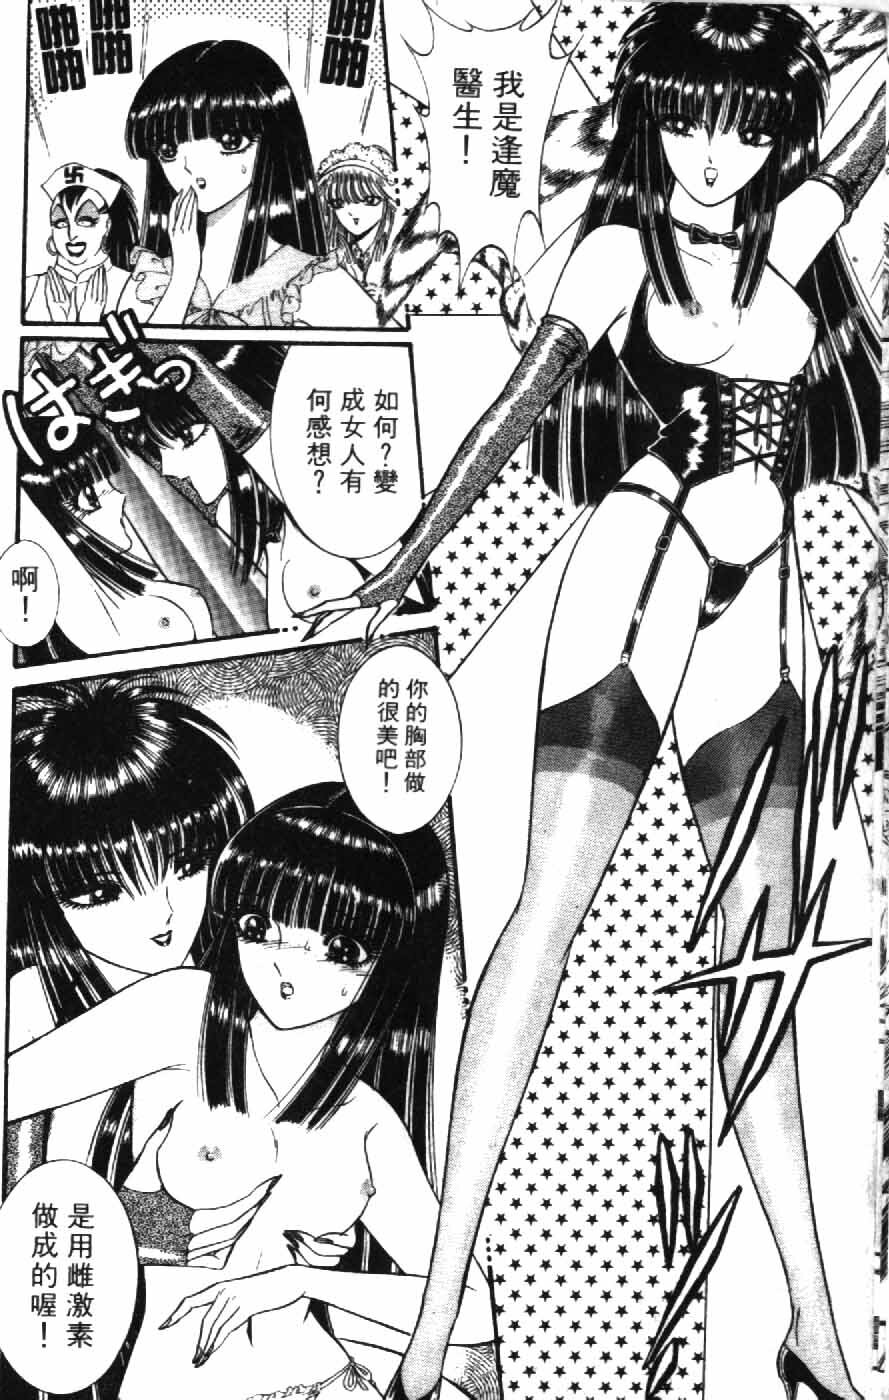 [Senno Knife] Ouma ga Horror Show 1 - Trans Sexual Special Show 1 | 顫慄博覽會 1 [Chinese] page 12 full